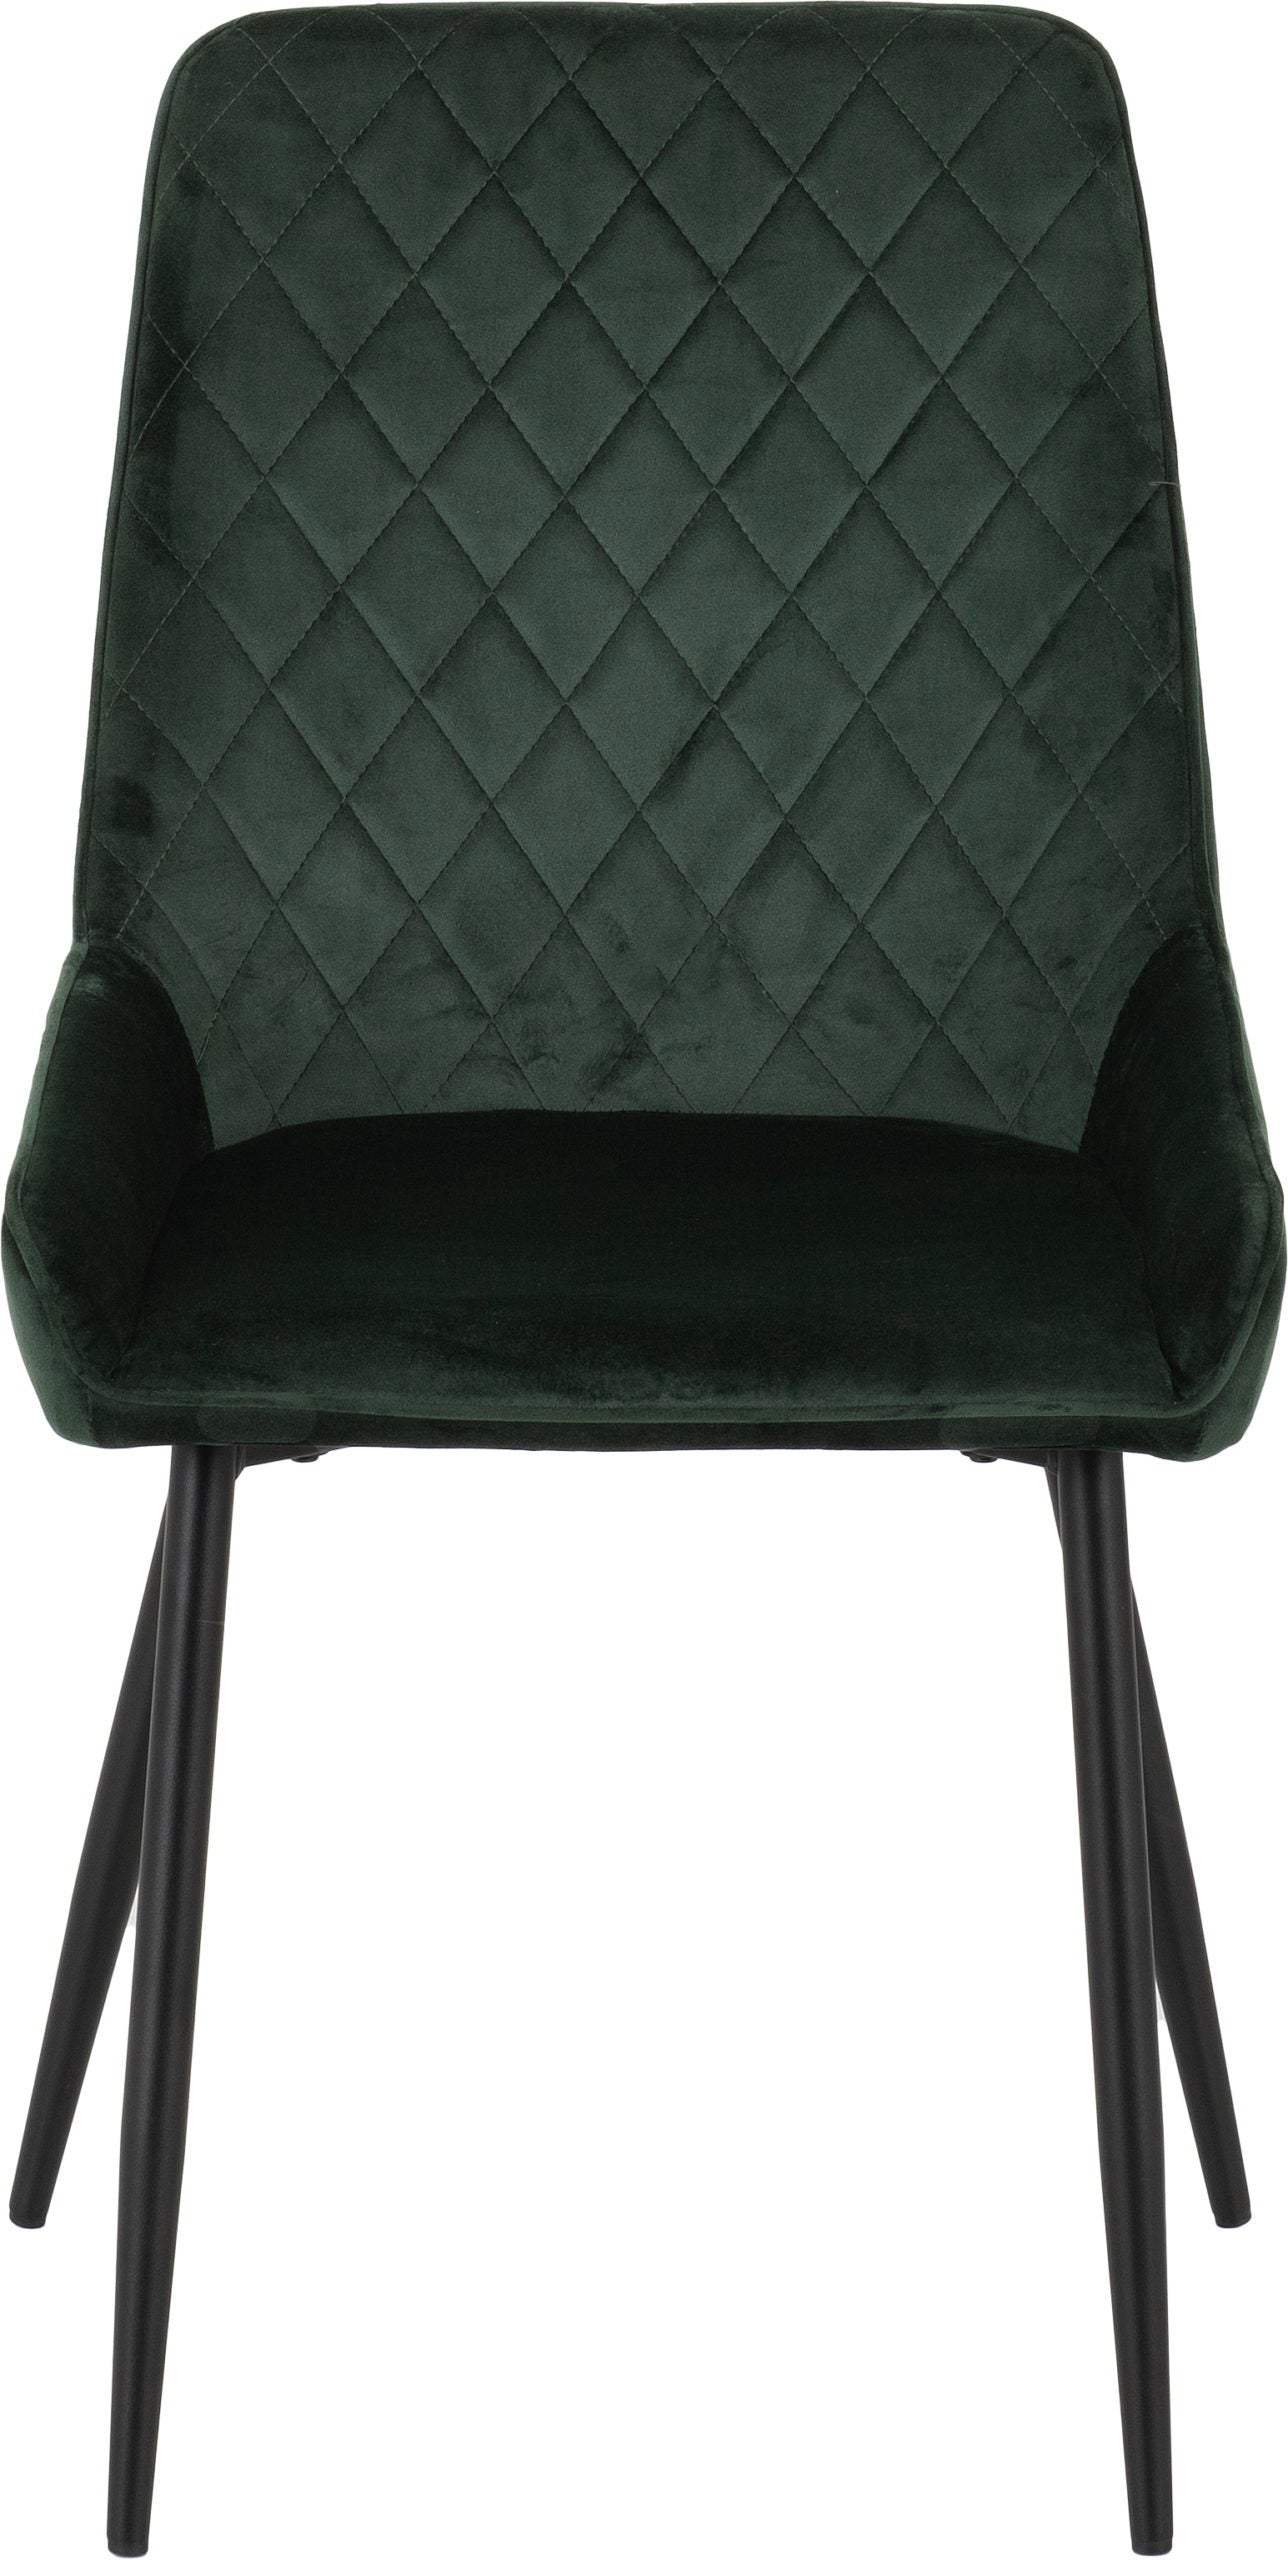 Avery Chair Emerald Green- The Right Buy Store